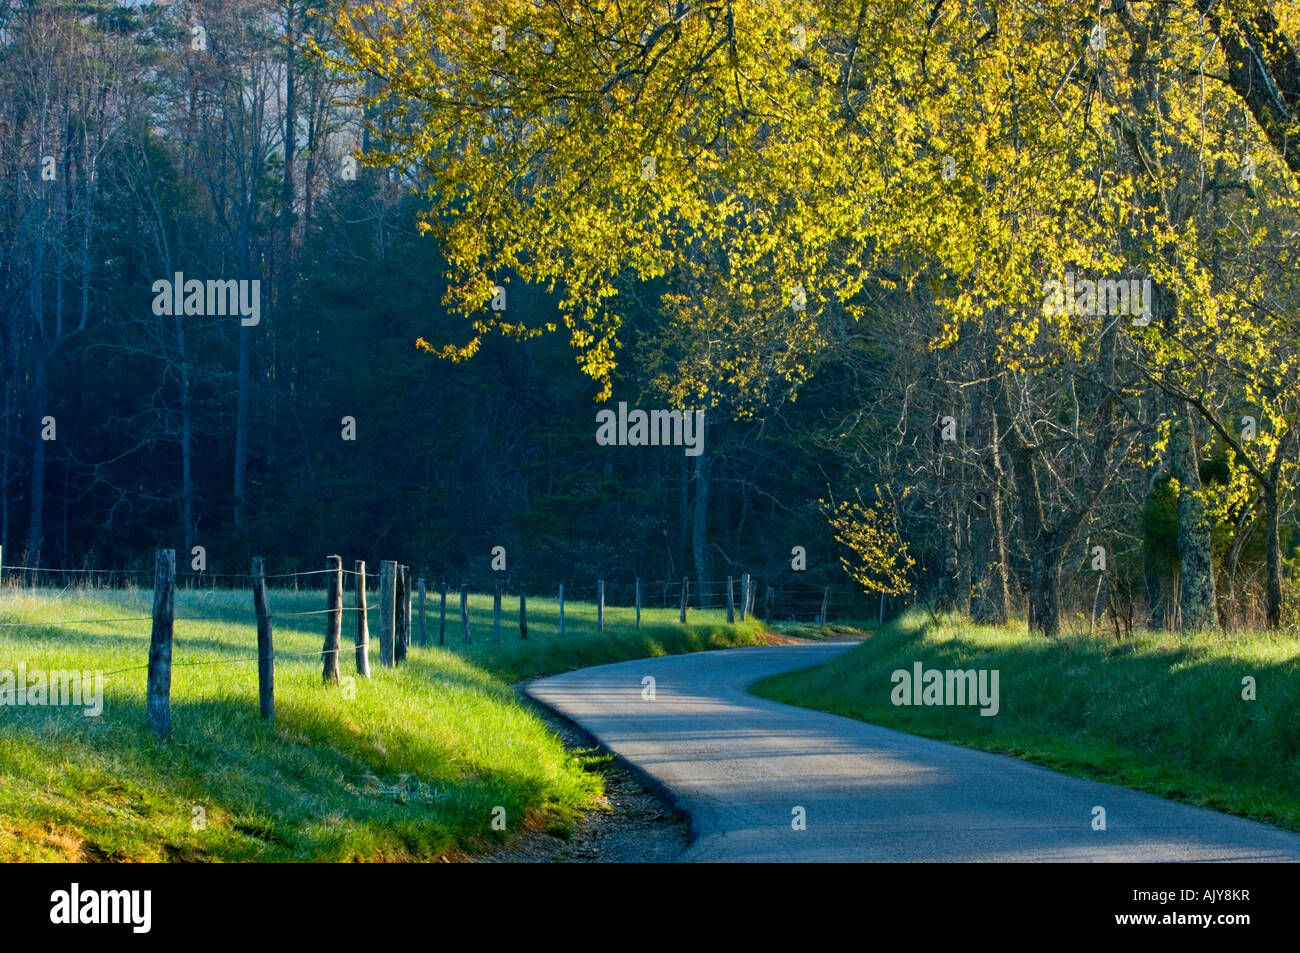 Il Loop Road e fenceline in Cades Cove, Great Smoky Mountains National Park, Tennessee, Stati Uniti d'America Foto Stock